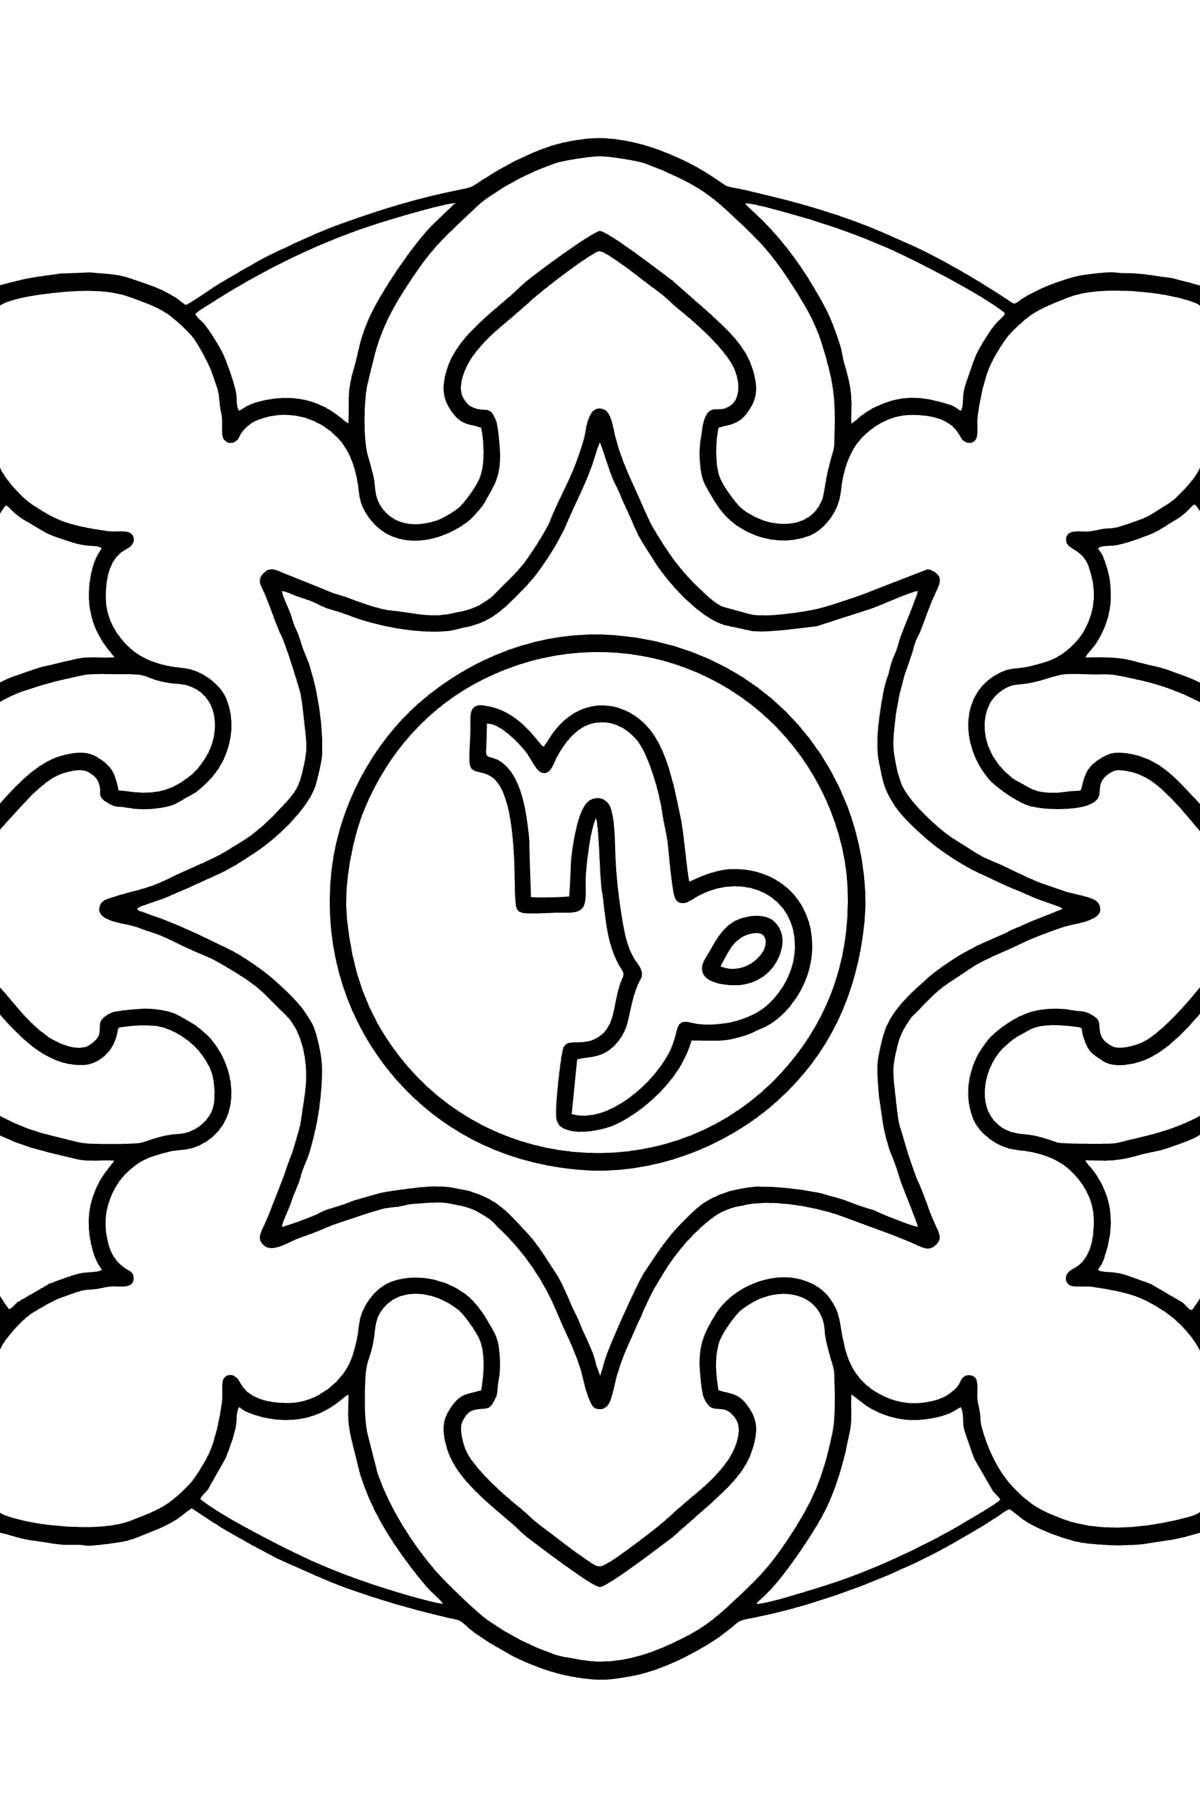 Coloring page - Capricorn zodiac sign - Coloring Pages for Kids